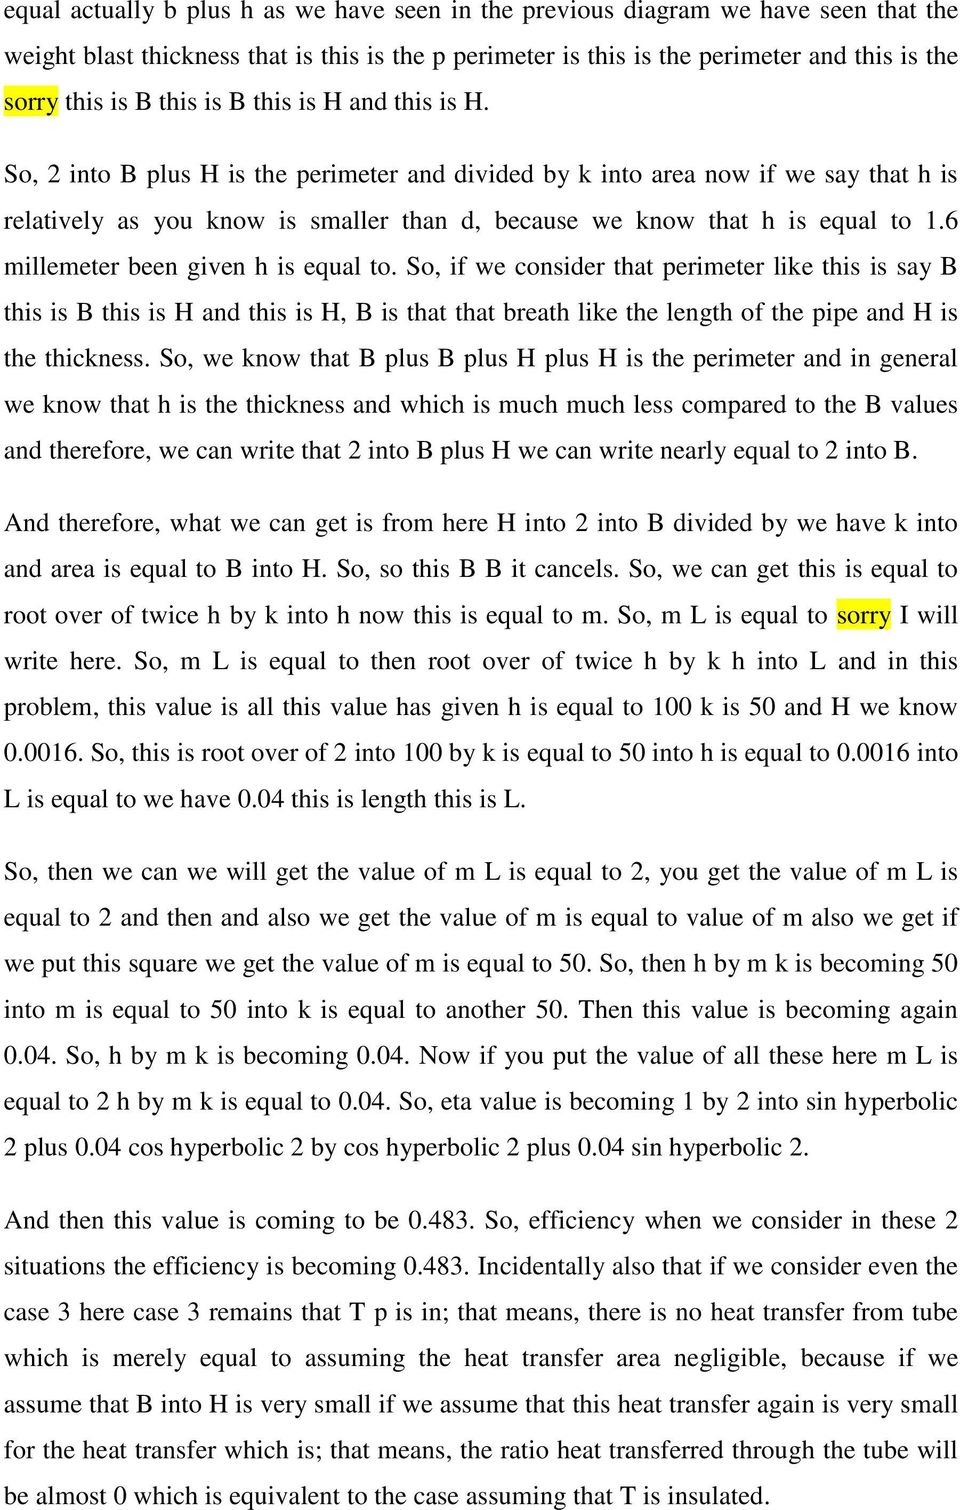 So, 2 into B plus H is the perimeter and divided by k into area now if we say that h is relatively as you know is smaller than d, because we know that h is equal to 1.